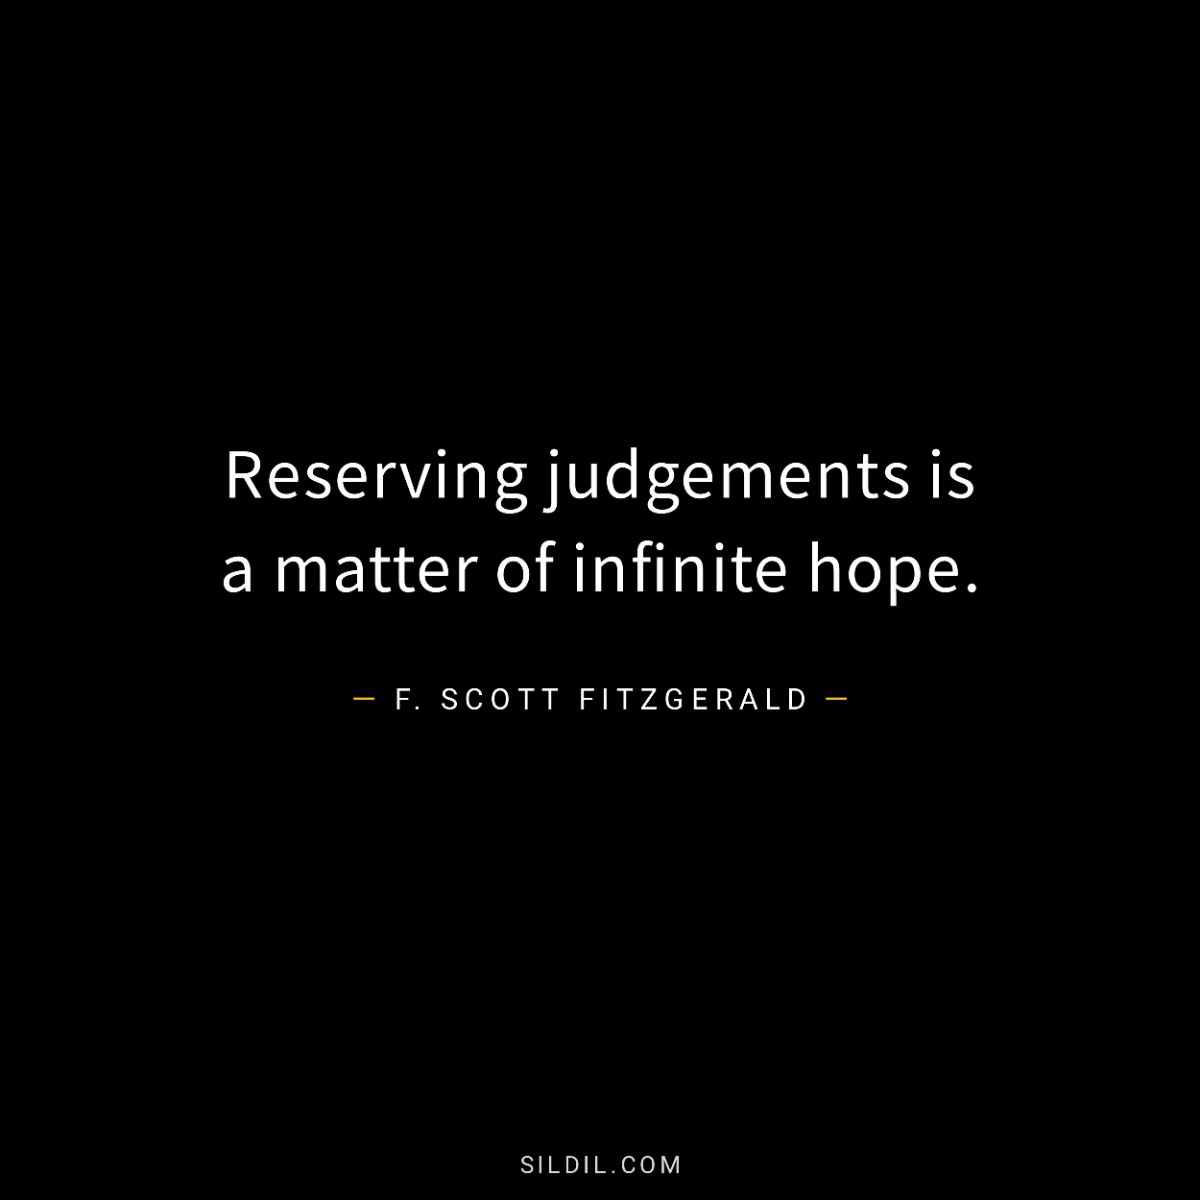 Reserving judgements is a matter of infinite hope.